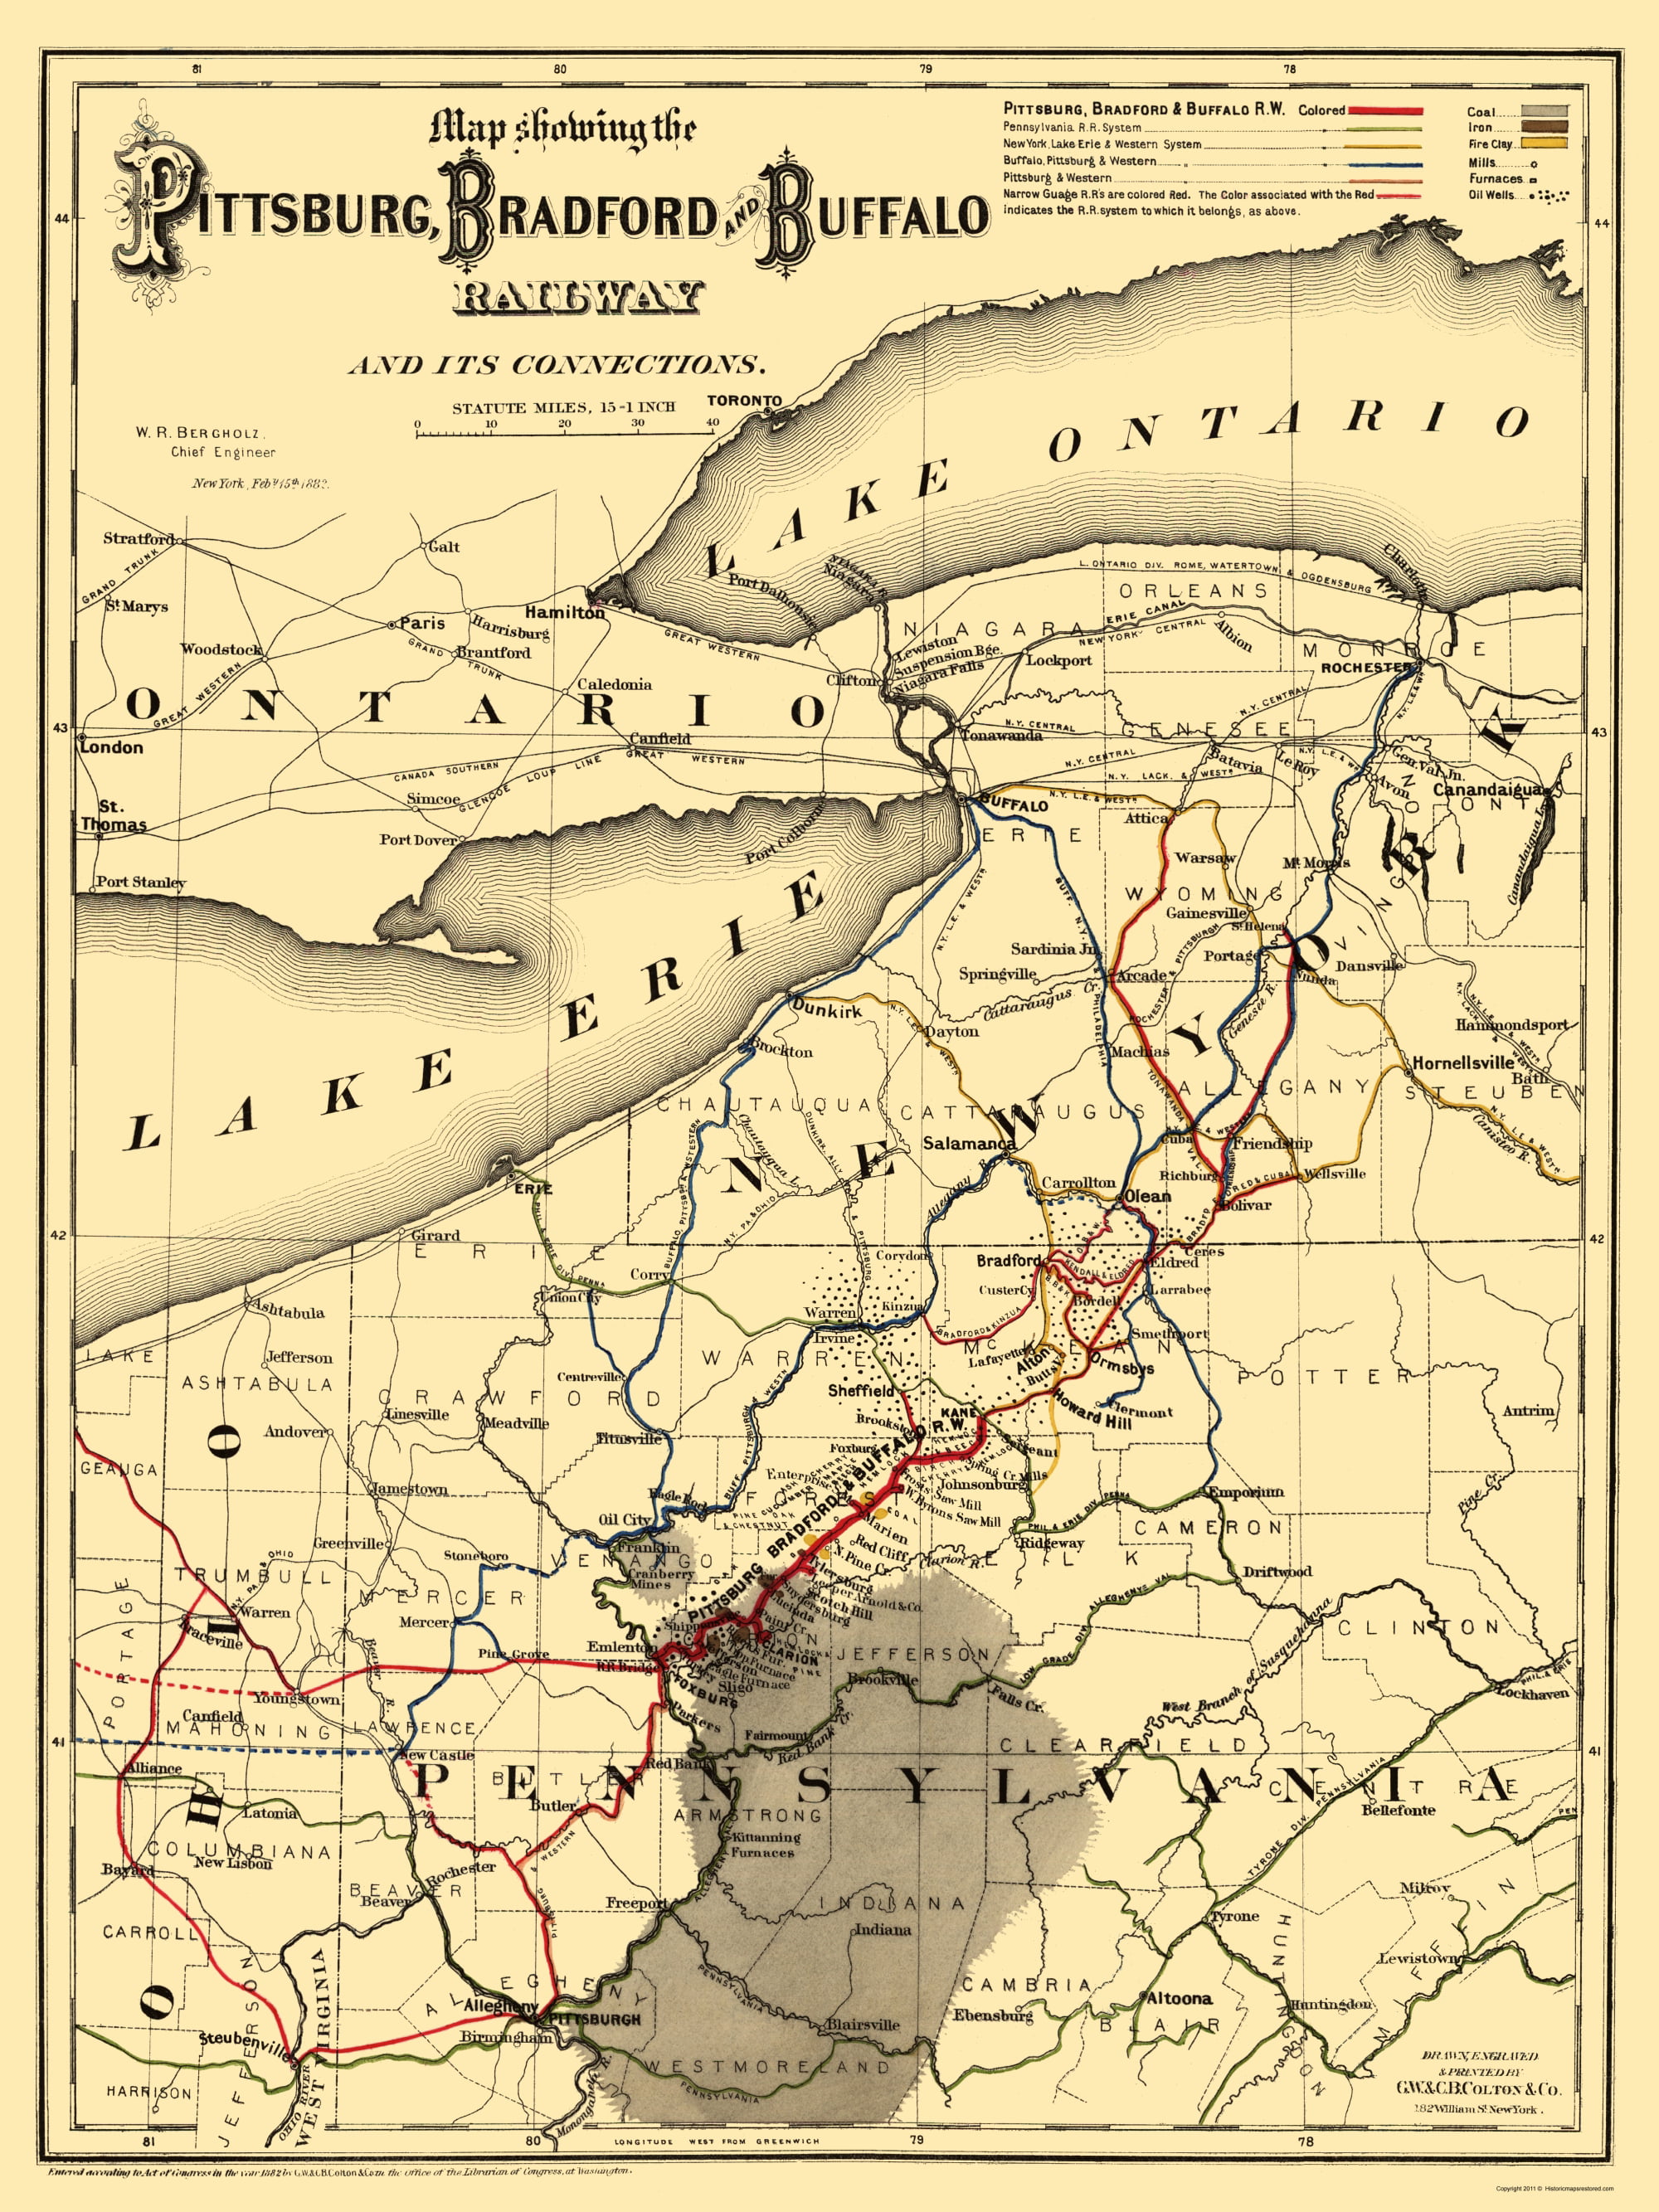 24x36 Vintage Reproduction Pittsburgh Bradford and Buffalo RR 1882